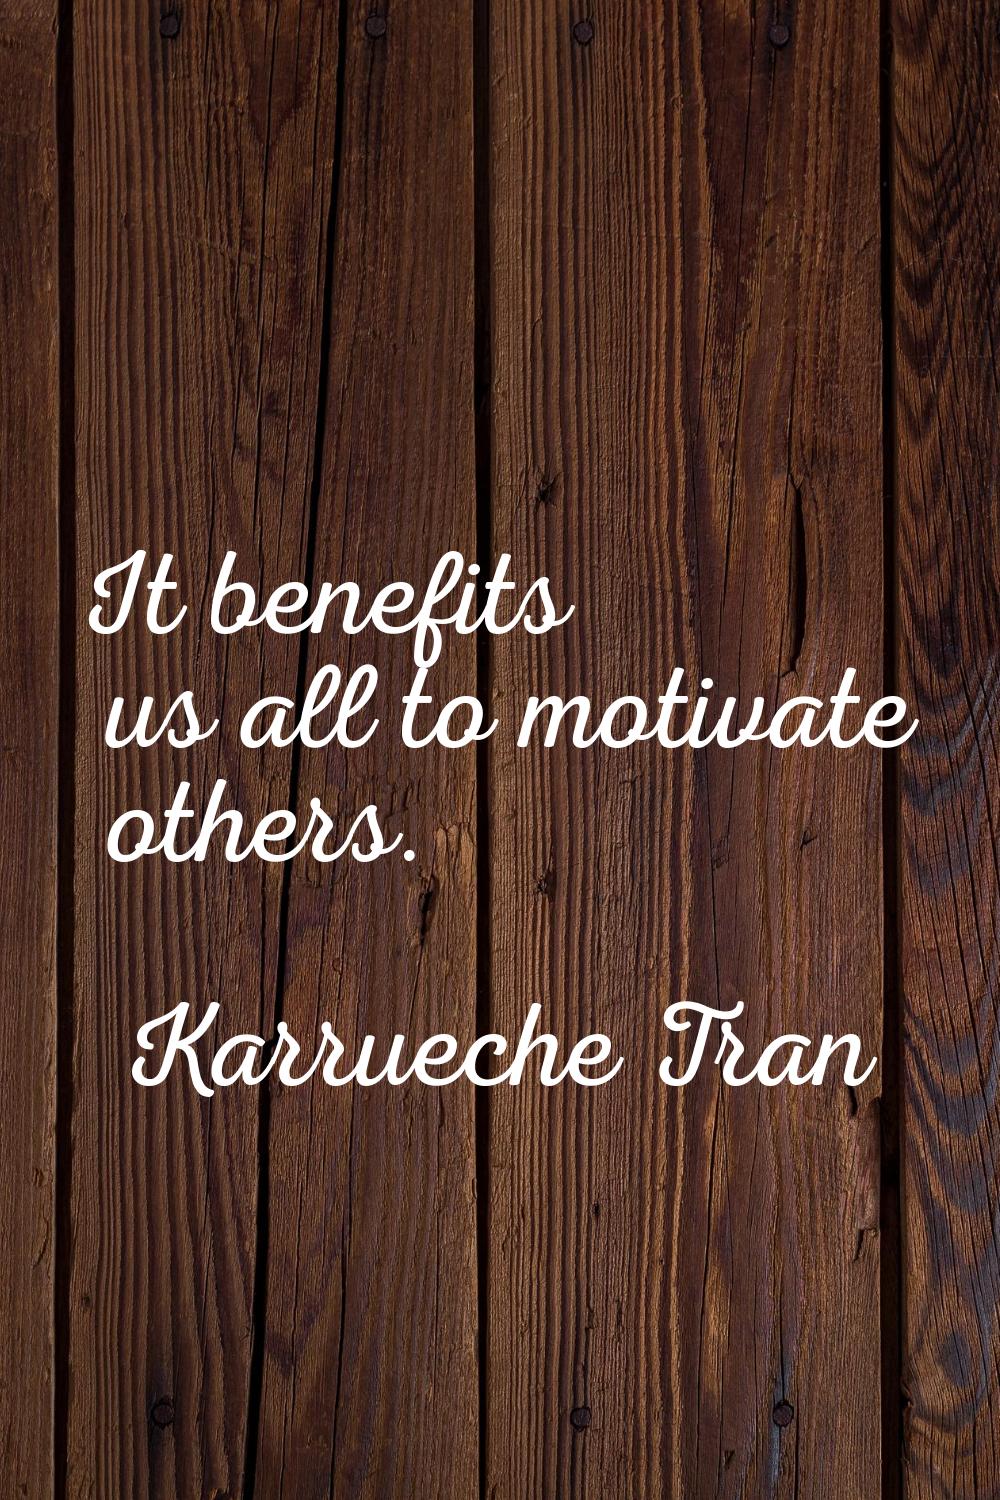 It benefits us all to motivate others.